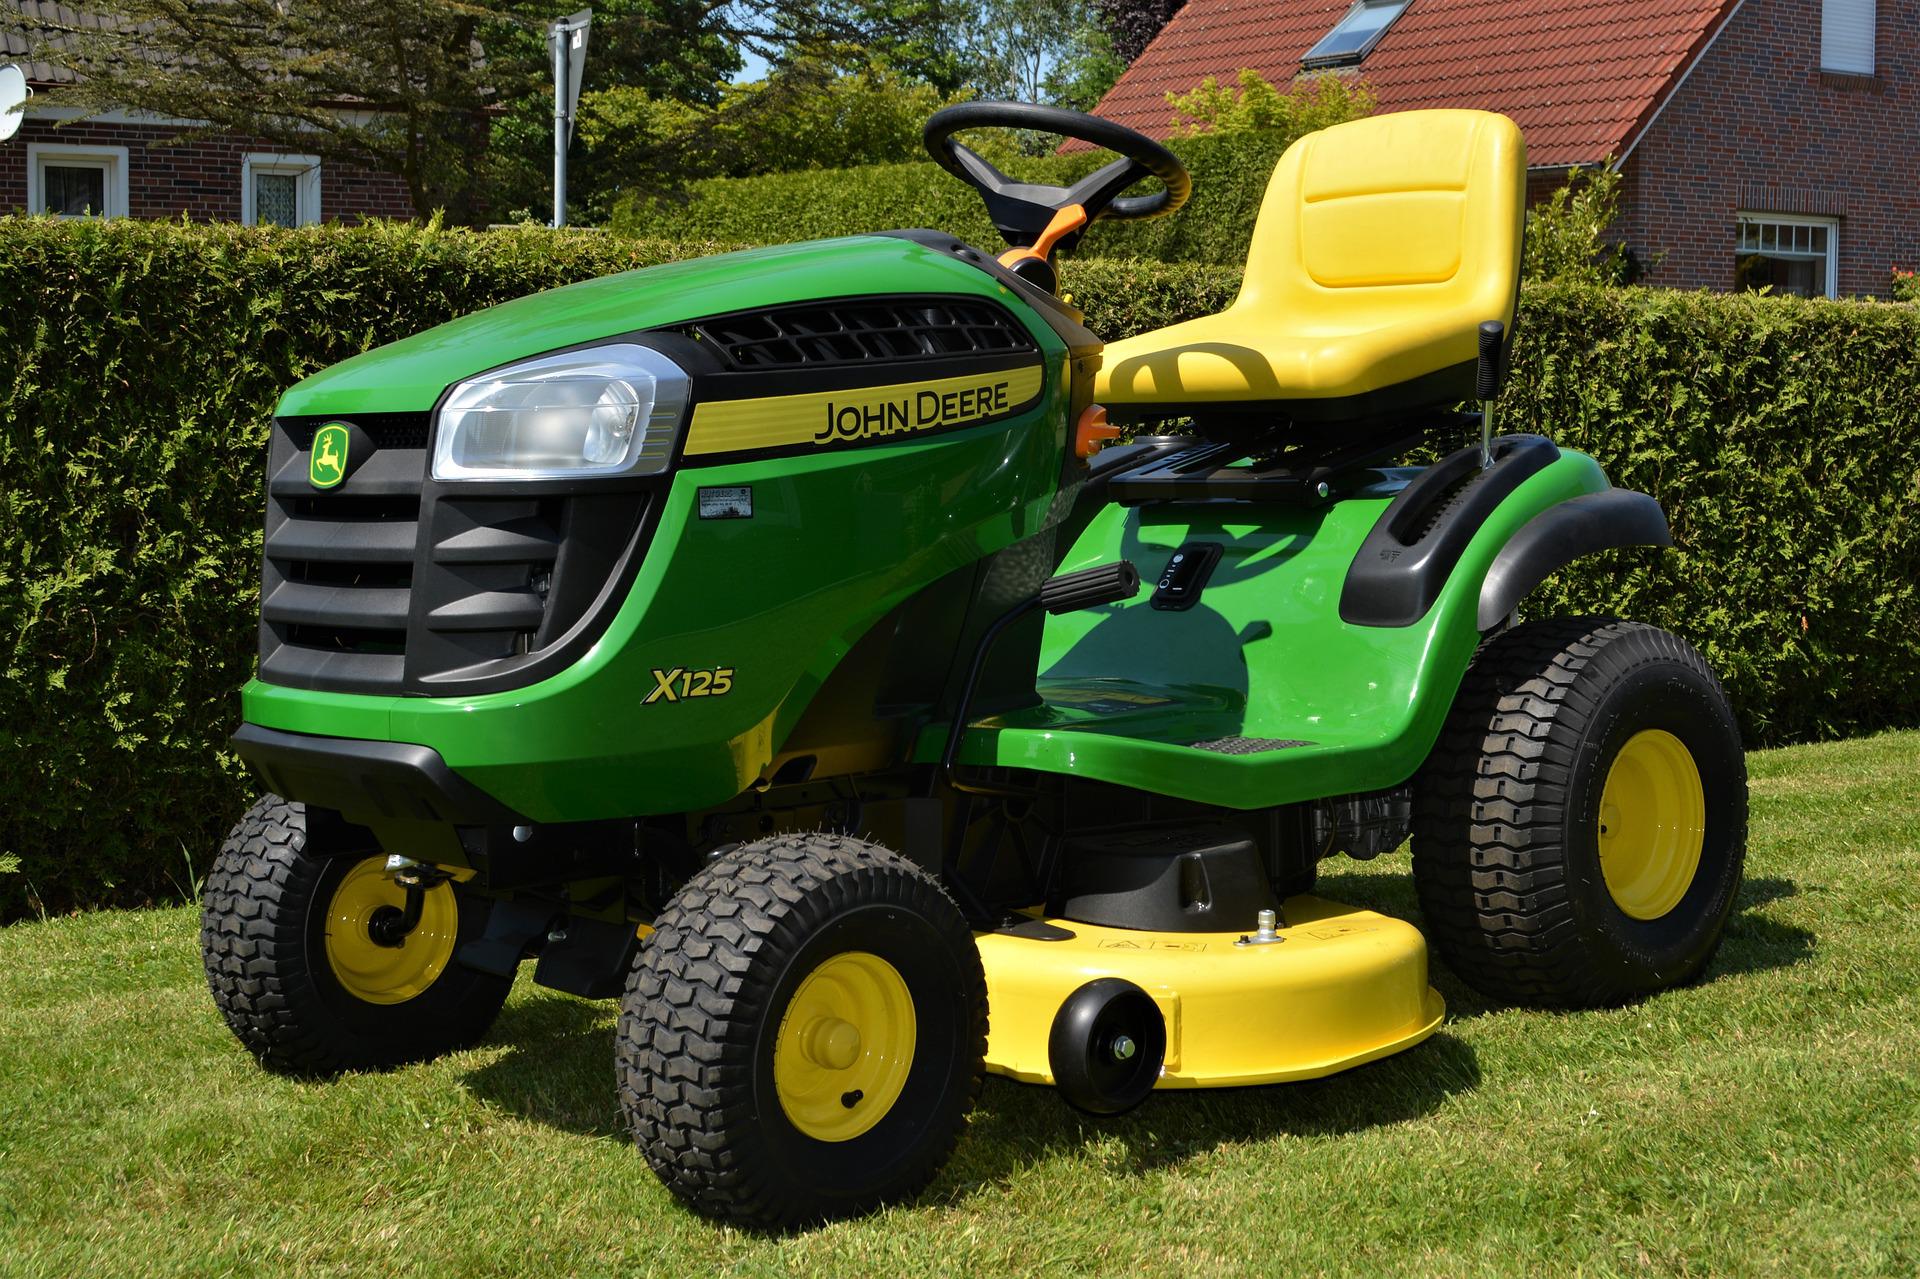 How Big Of A Garden Do I Need For A Ride-on Mower